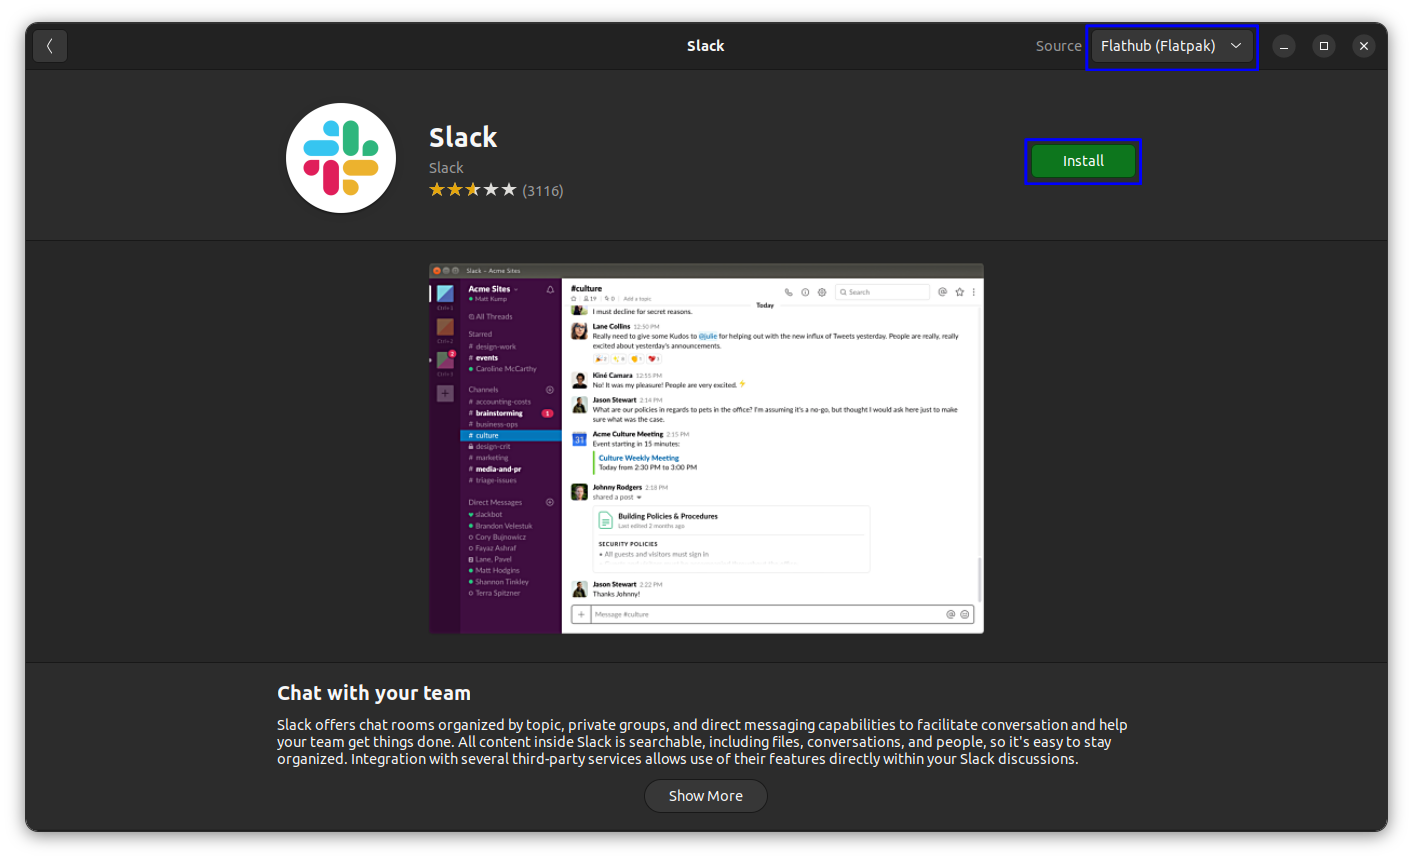 Install Slack as a Flatpak package through GNOME software center in Fedora